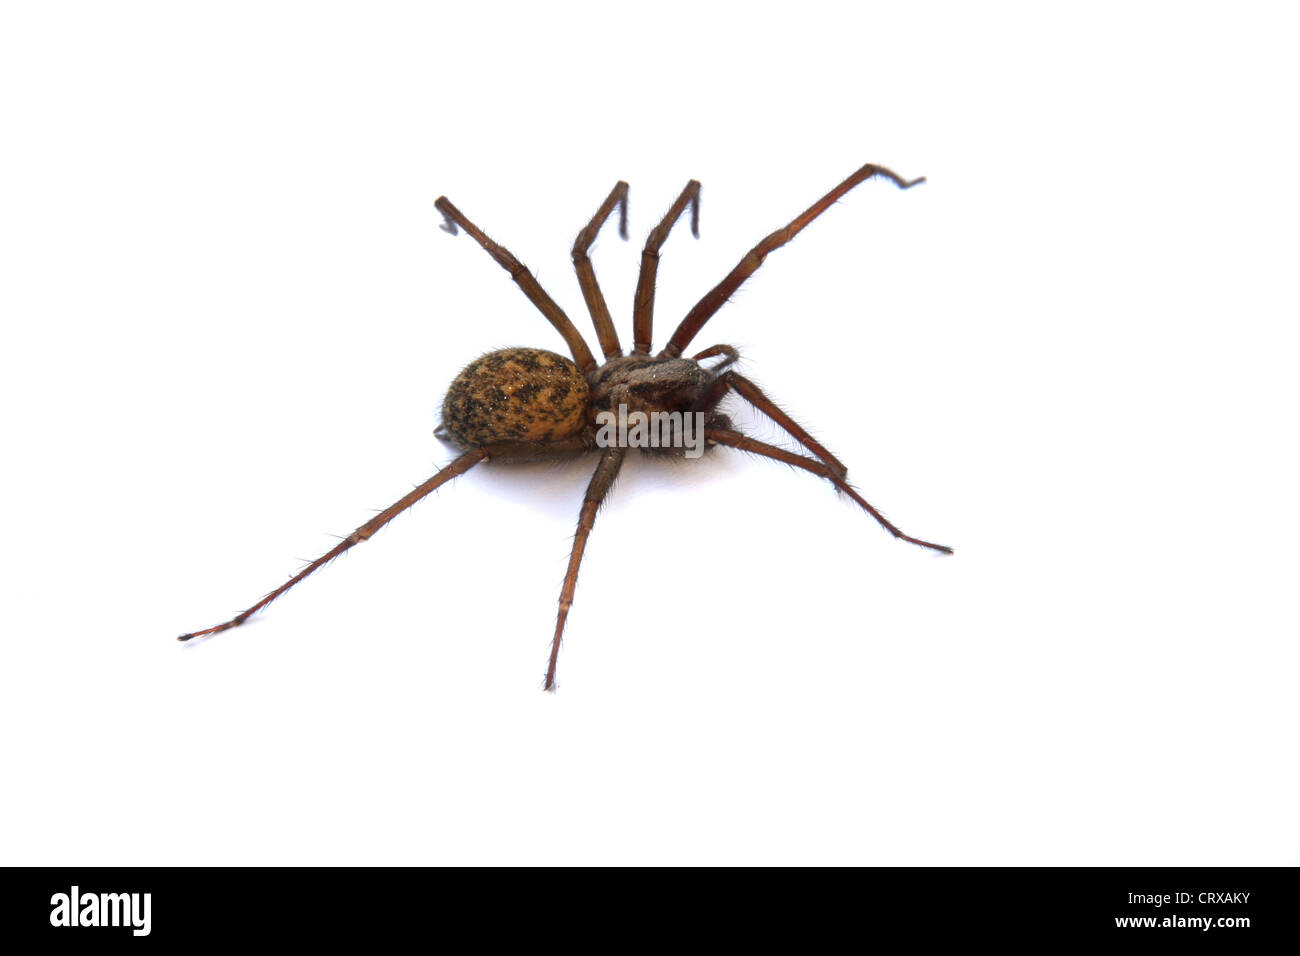 Tegenaria Gigantea or a Common House Spider, found in the UK. Stock Photo